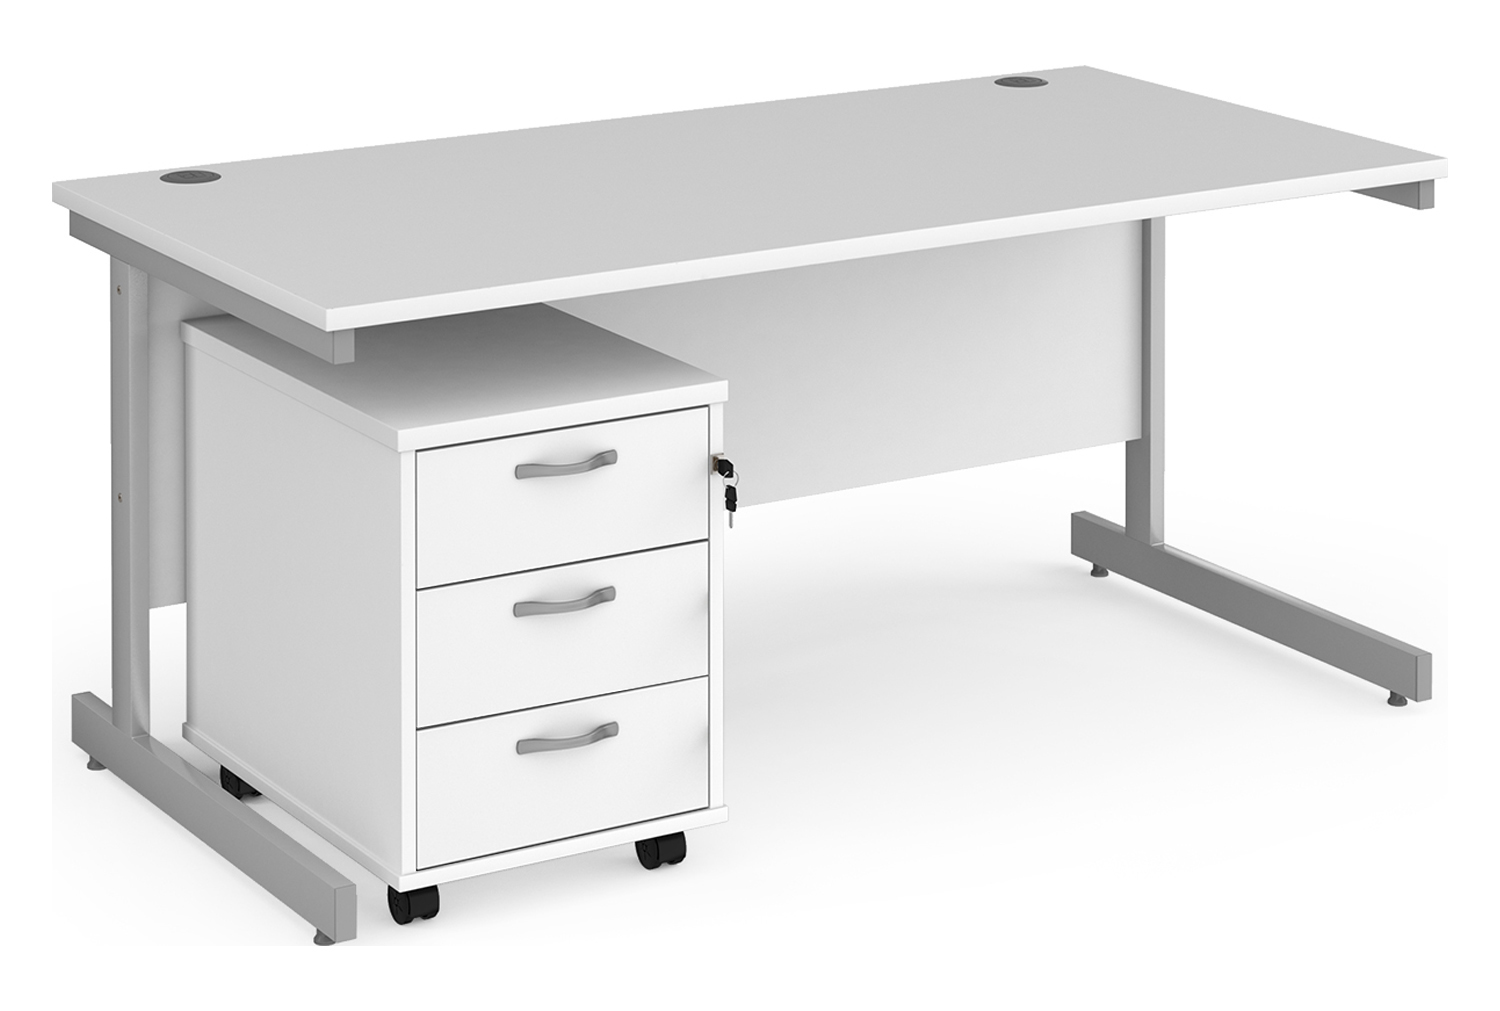 Tully I Office Desk Bundle Deal 2, 160wx80dx73h (cm), White, Express Delivery